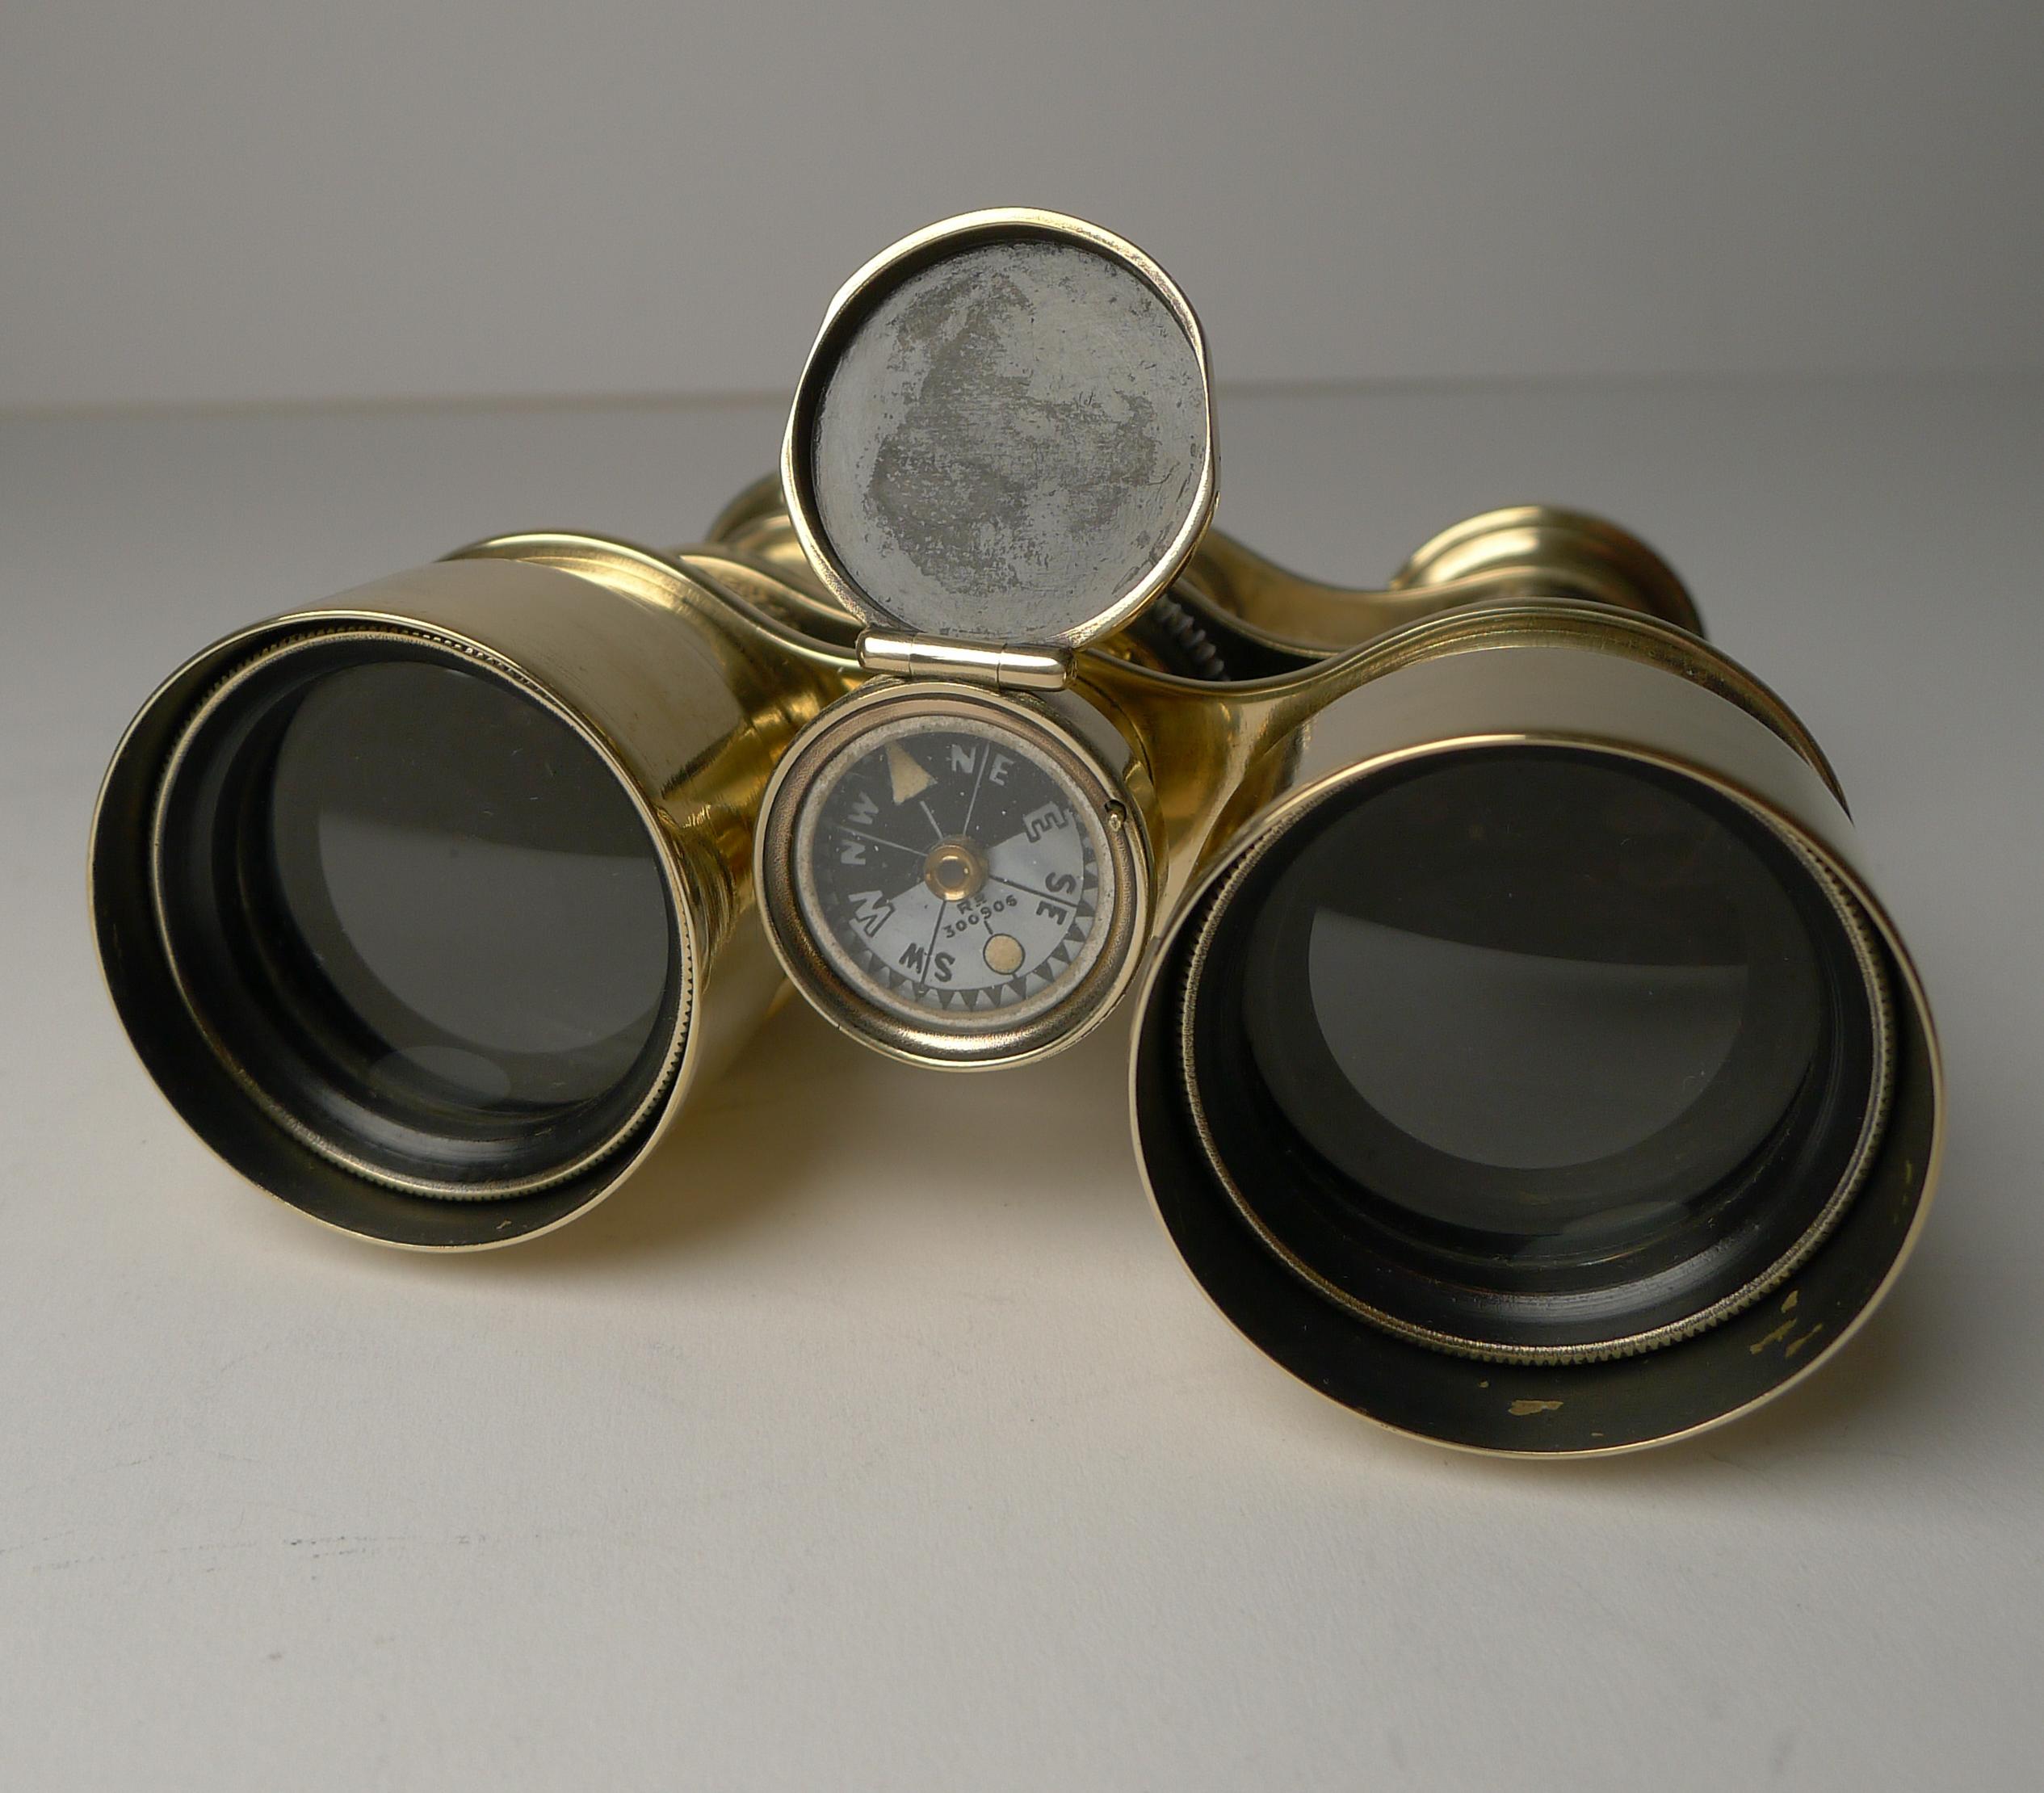 British Antique English Field Glasses / Binoculars by Lawrence and Mayo, with Compass